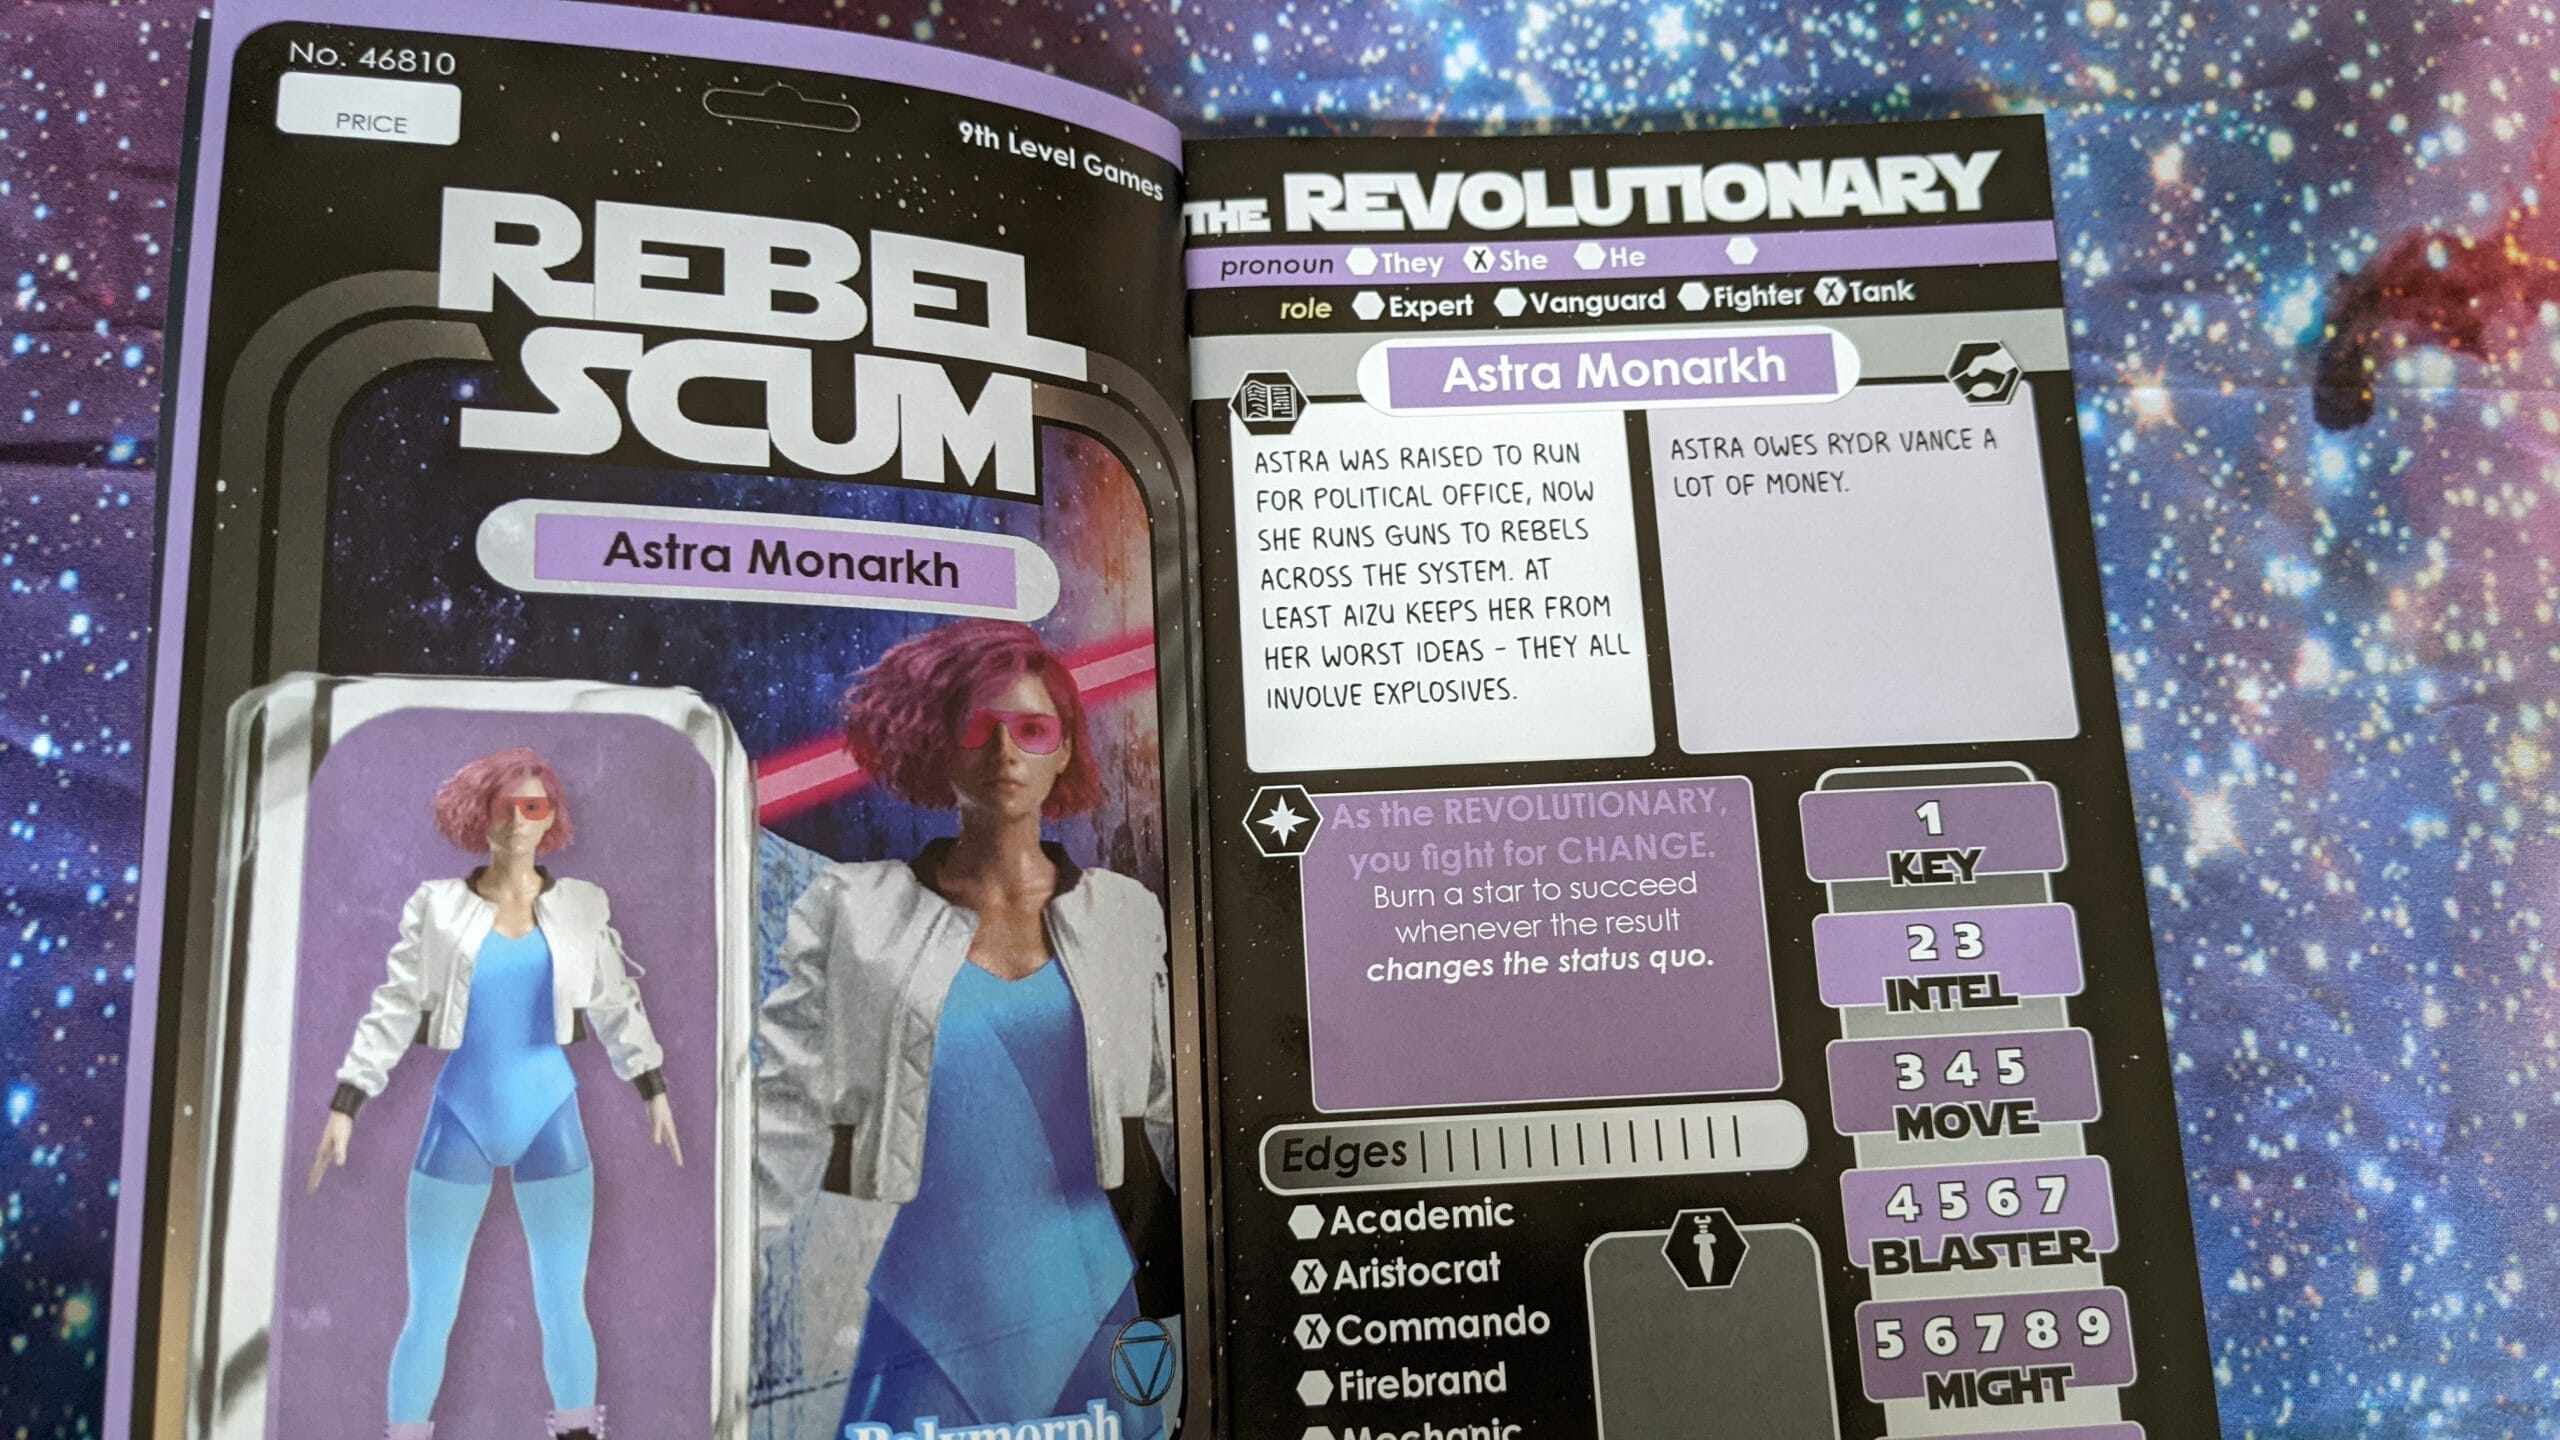 Punch a space Nazi Killtrooper and enjoy it: A review of Rebel Scum